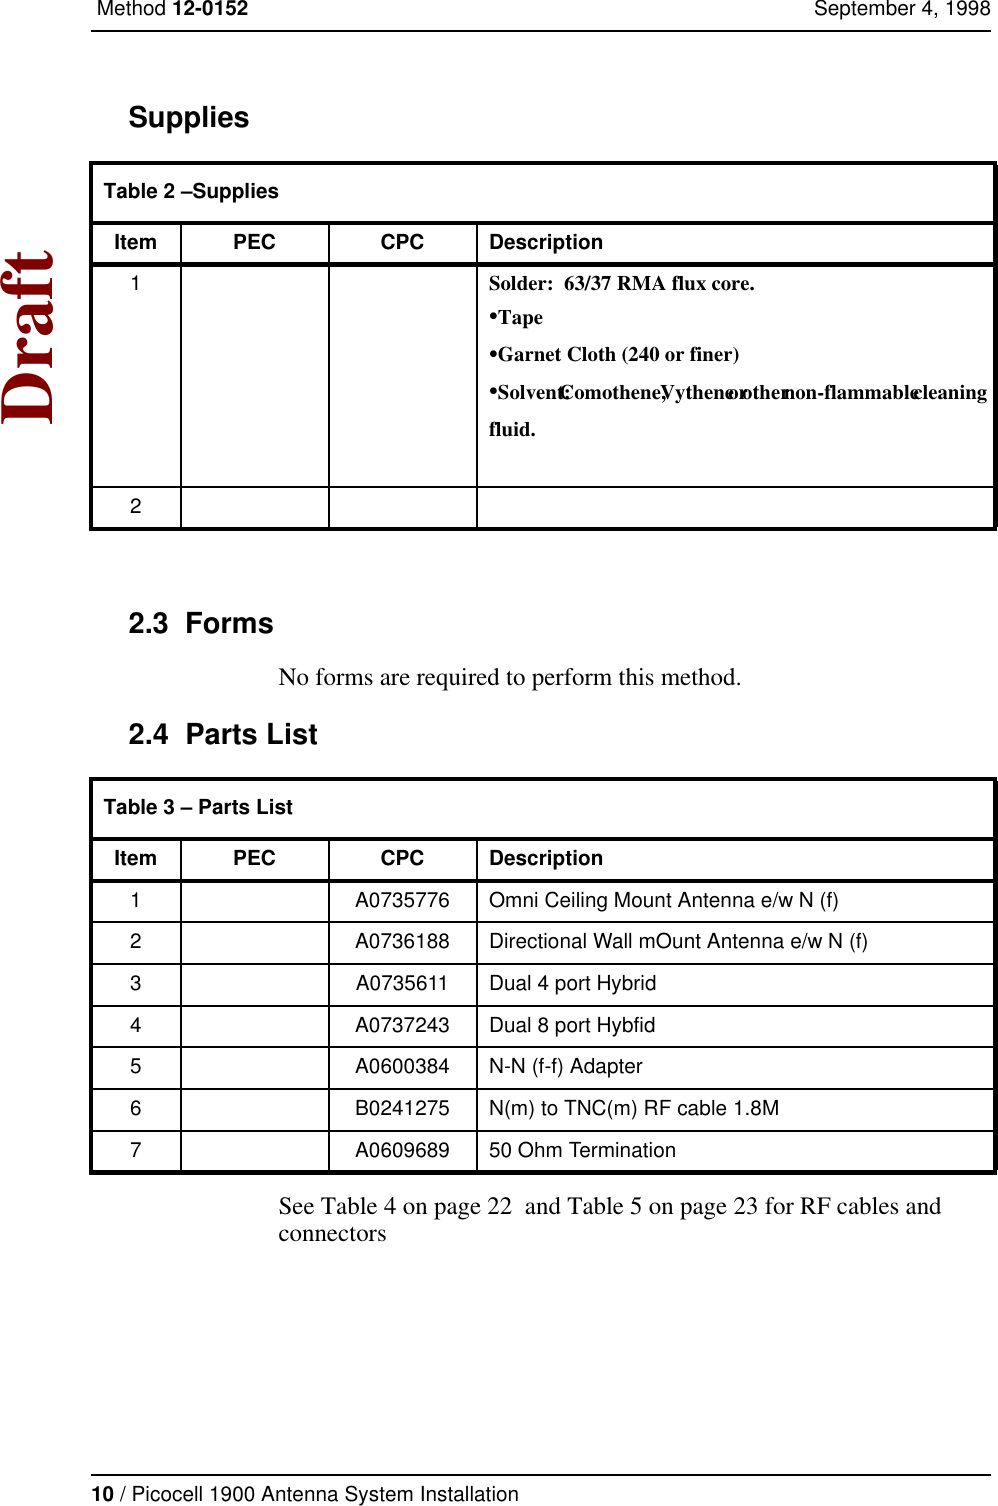 10 / Picocell 1900 Antenna System Installation Method 12-0152 September 4, 1998DraftSupplies2.3  FormsNo forms are required to perform this method.2.4  Parts ListSee Table 4 on page 22  and Table 5 on page 23 for RF cables and connectorsTable 2 –SuppliesItem PEC CPC Description1Solder:  63/37 RMA flux core.•Tape•Garnet Cloth (240 or finer)•Solvent:  Comothene, Vythene or other non-flammable cleaning fluid.2Table 3 – Parts ListItem PEC CPC Description1 A0735776 Omni Ceiling Mount Antenna e/w N (f)2 A0736188 Directional Wall mOunt Antenna e/w N (f)3 A0735611 Dual 4 port Hybrid4 A0737243 Dual 8 port Hybfid5 A0600384 N-N (f-f) Adapter6 B0241275 N(m) to TNC(m) RF cable 1.8M7 A0609689 50 Ohm Termination 